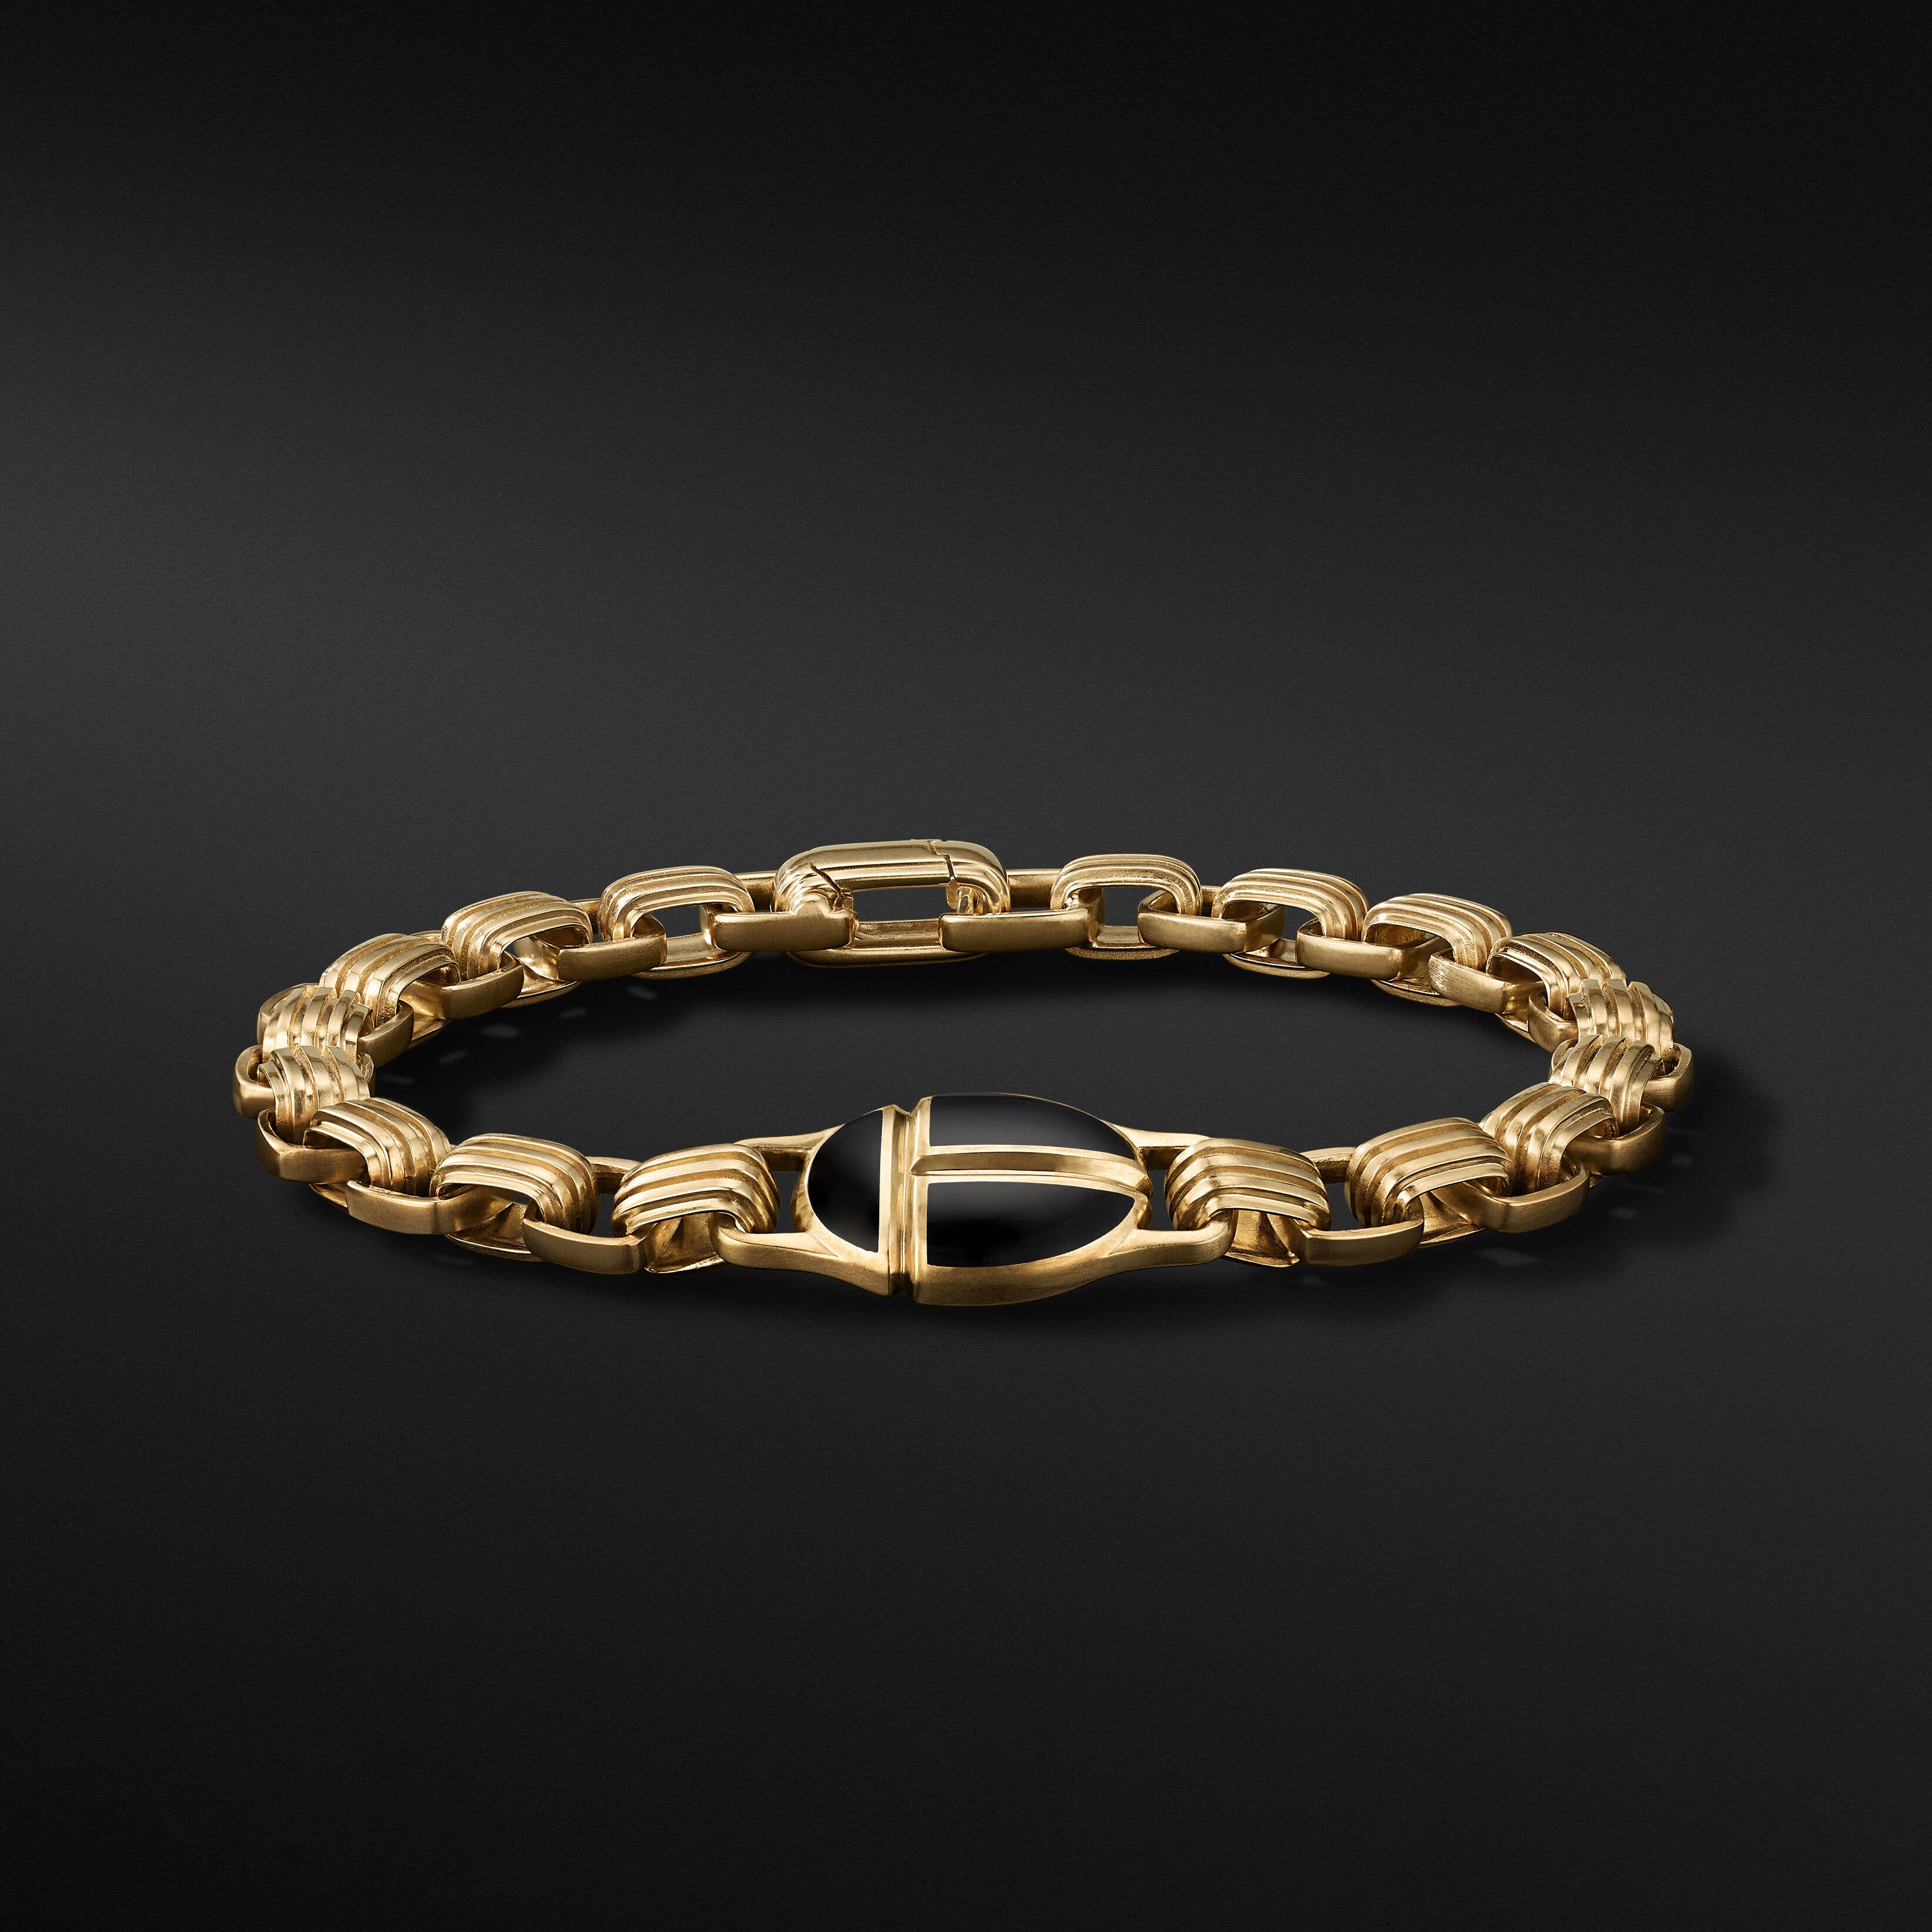 Cairo Chain Link Bracelet in 18K Yellow Gold with Black Onyx